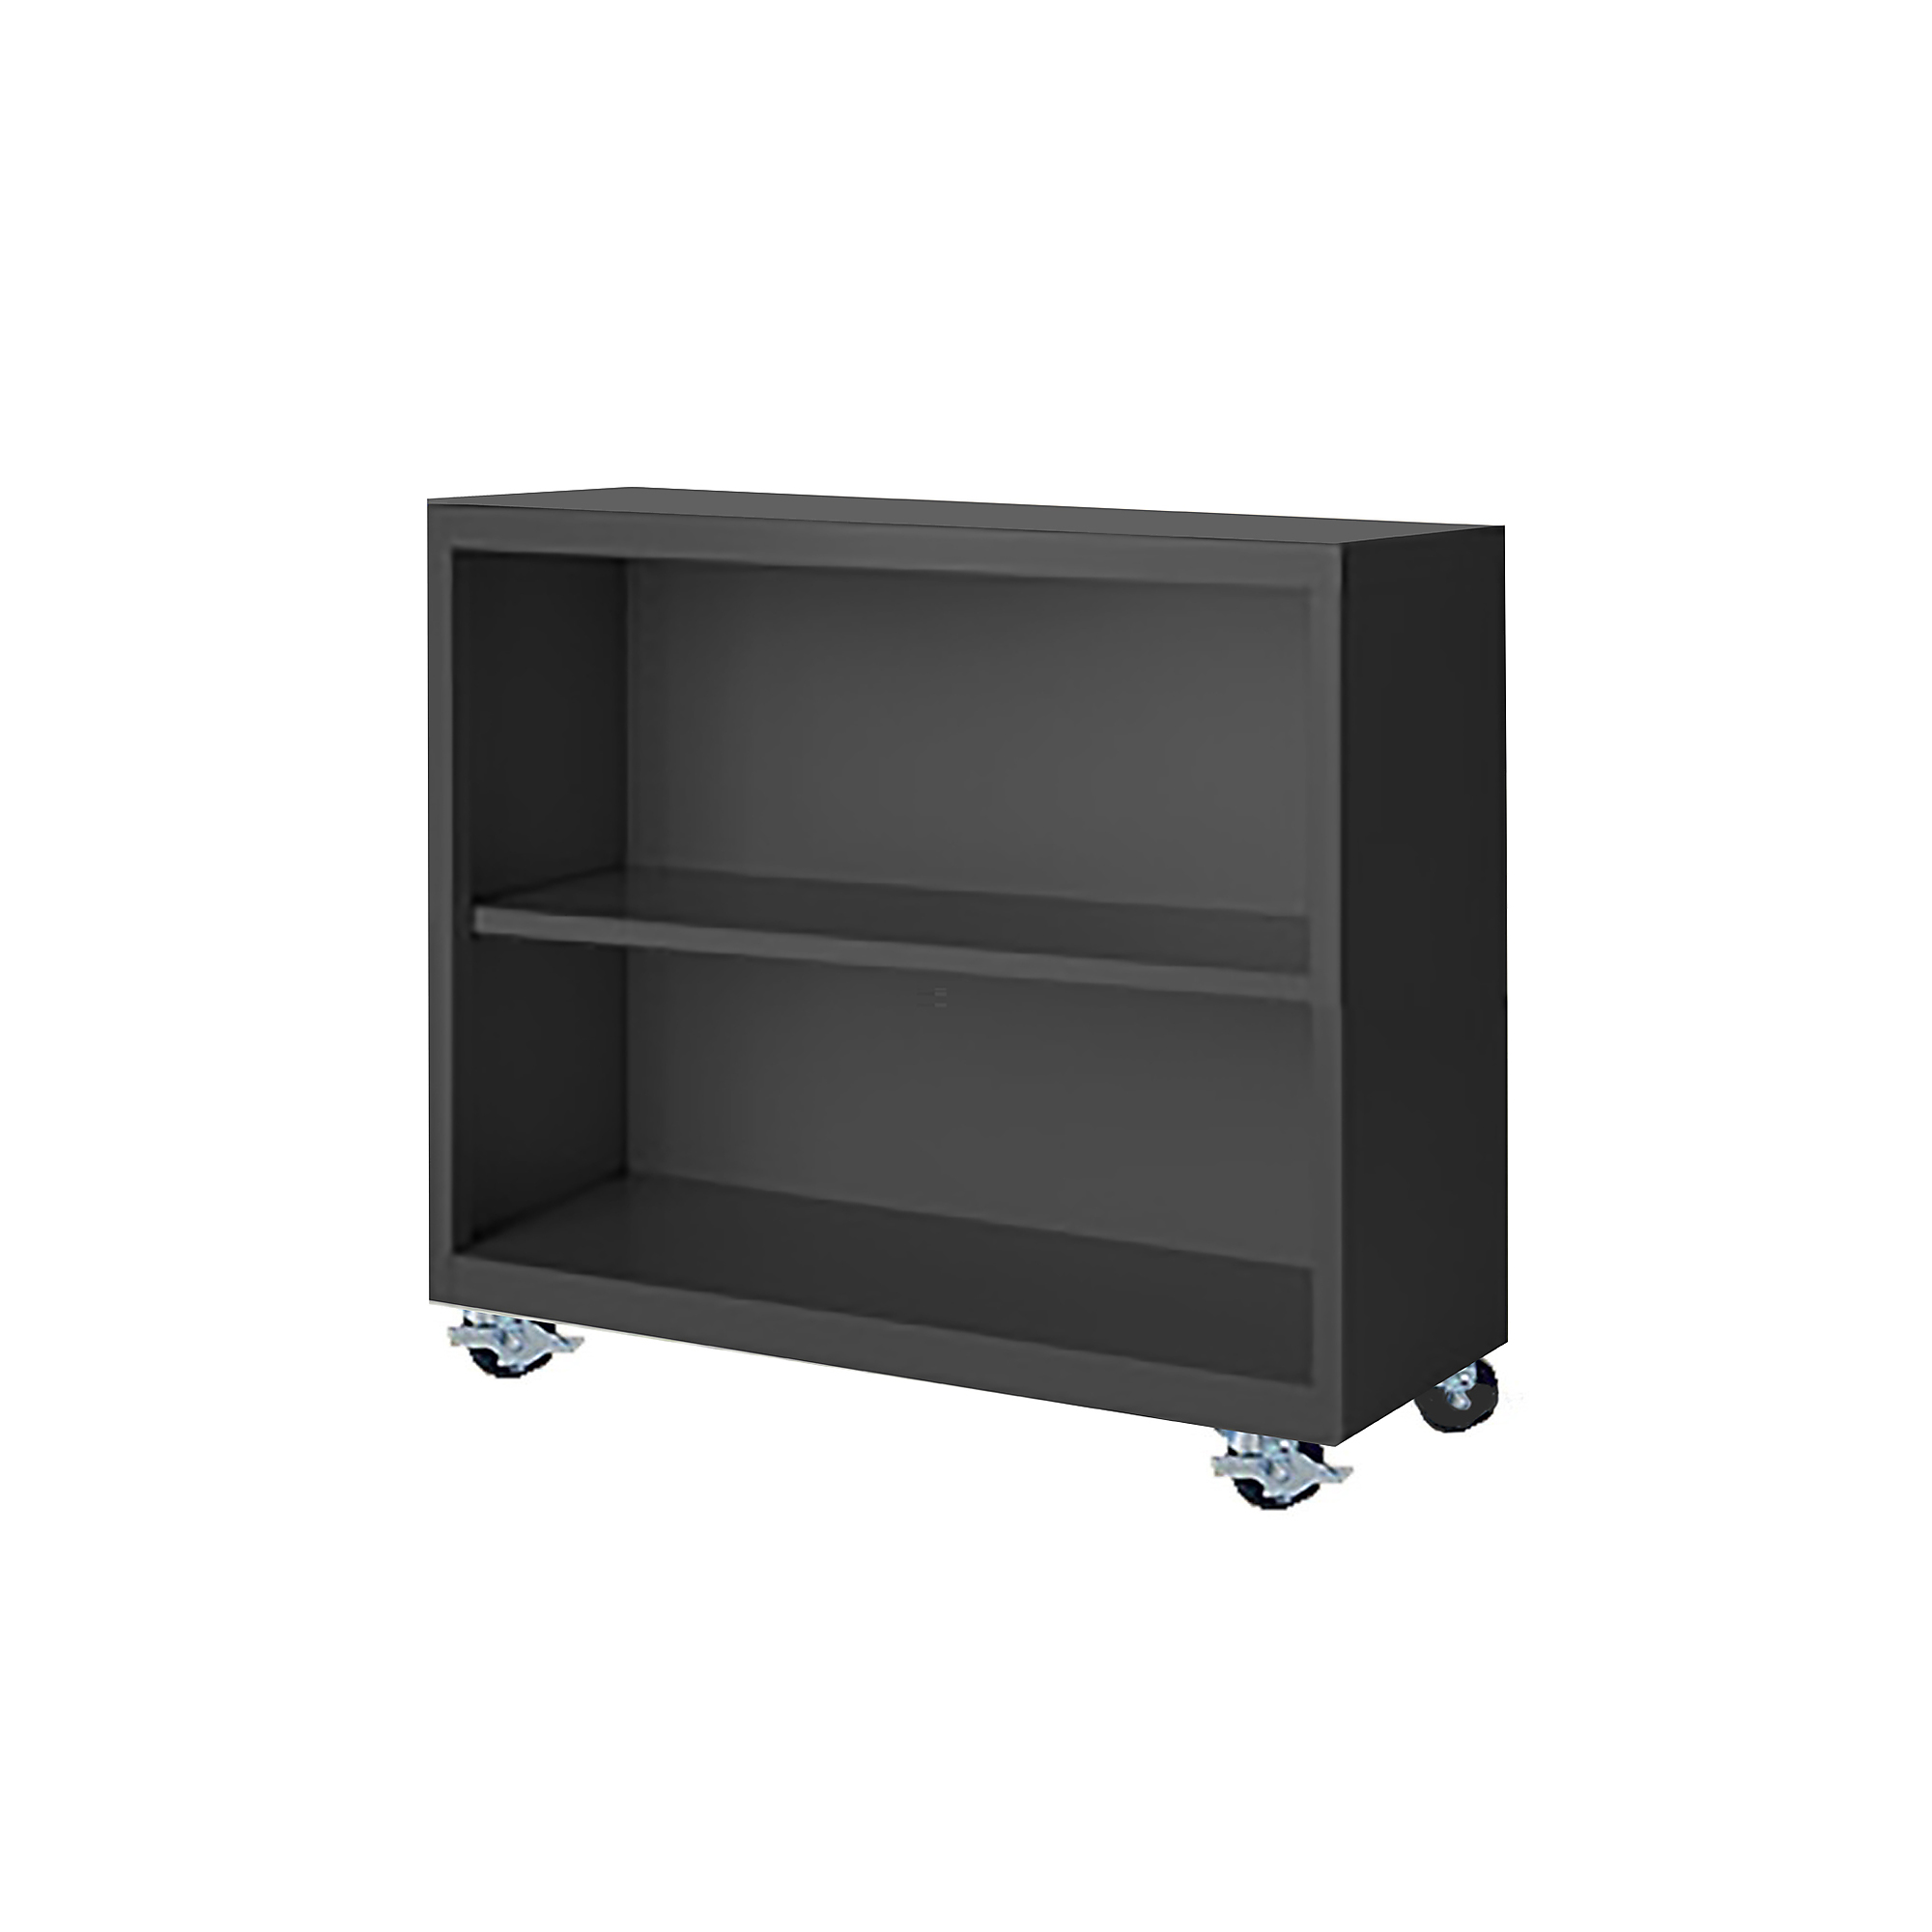 Steel Cabinets USA, 36Inchx18Inchx33Inch Charcoal Mobile Bookcase Assembled, Height 33 in, Shelves (qty.) 2, Material Steel, Model MBCA-363318-C